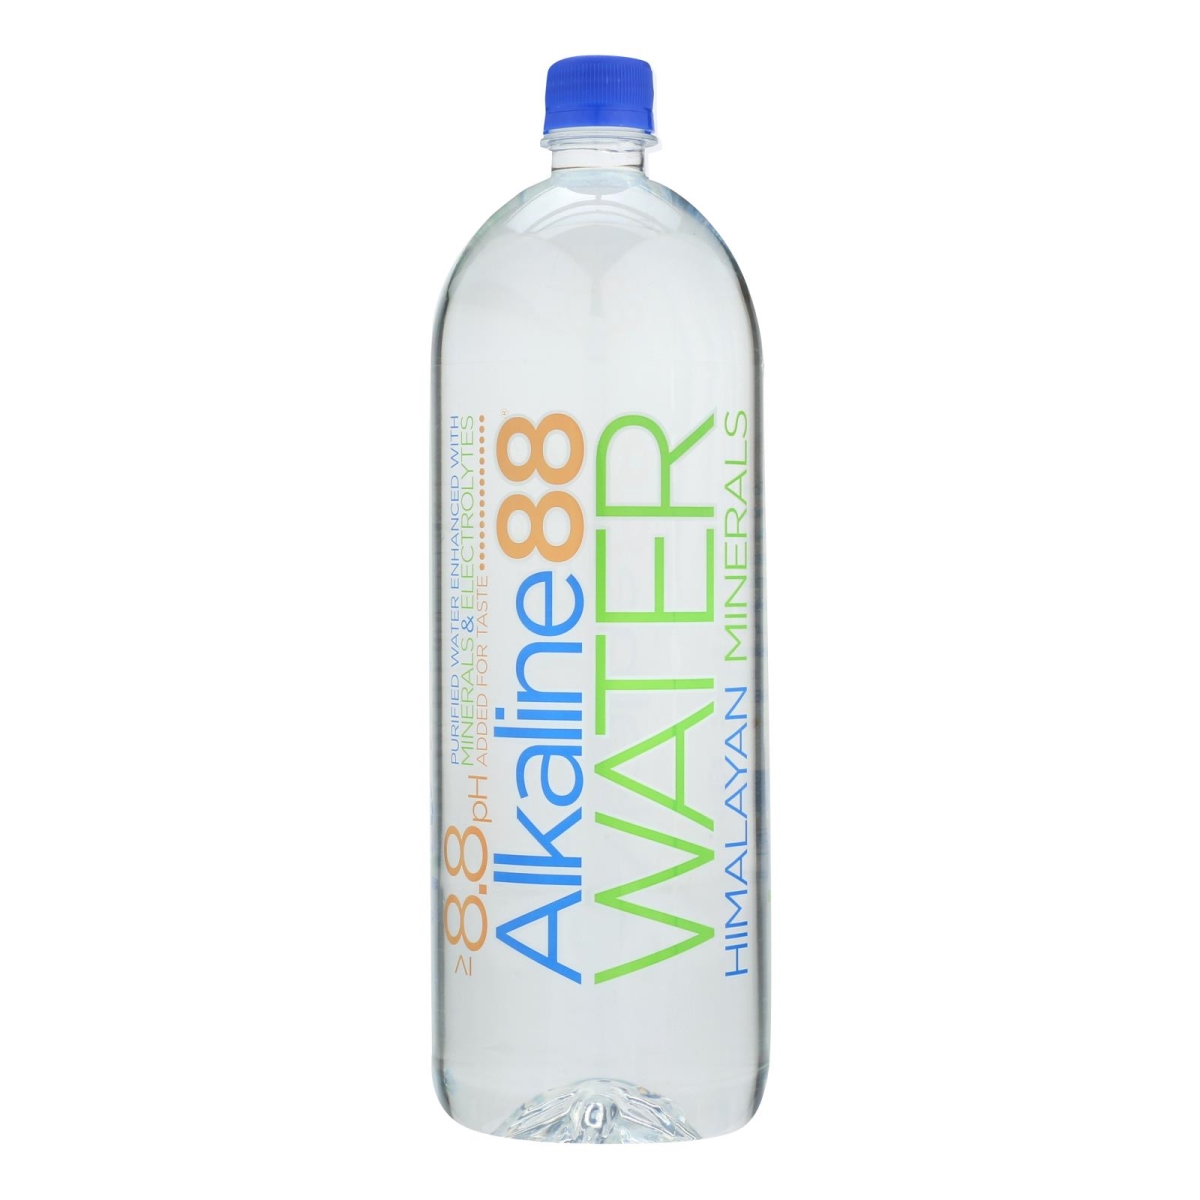 Picture of Alkaline 88 HG2315208 1.5 Litre 8.8 PH Purified Drink Water - Case of 6